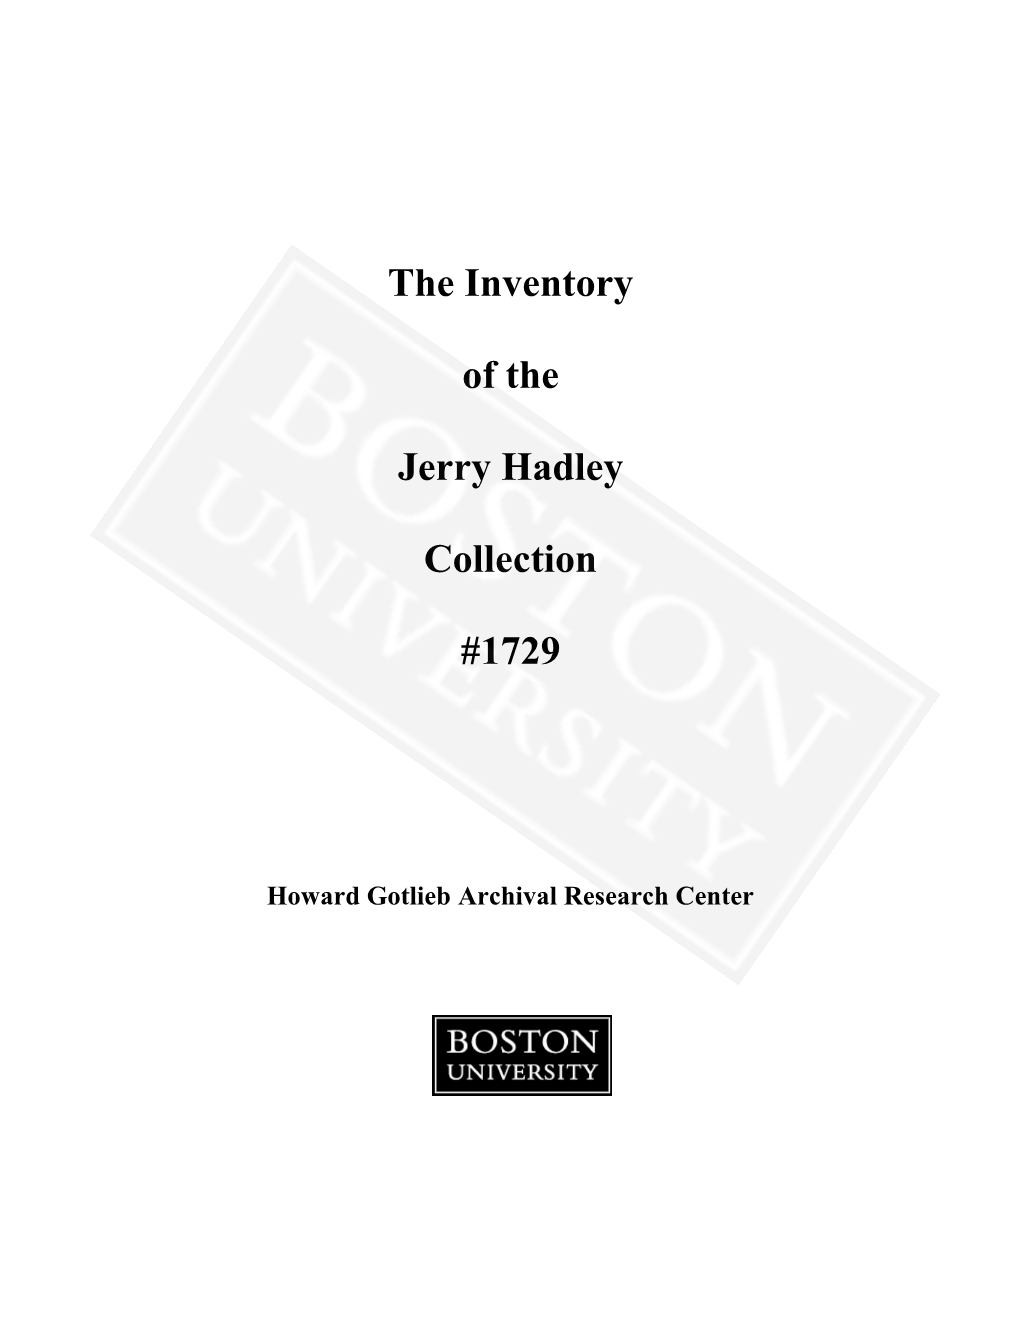 The Inventory of the Jerry Hadley Collection #1729